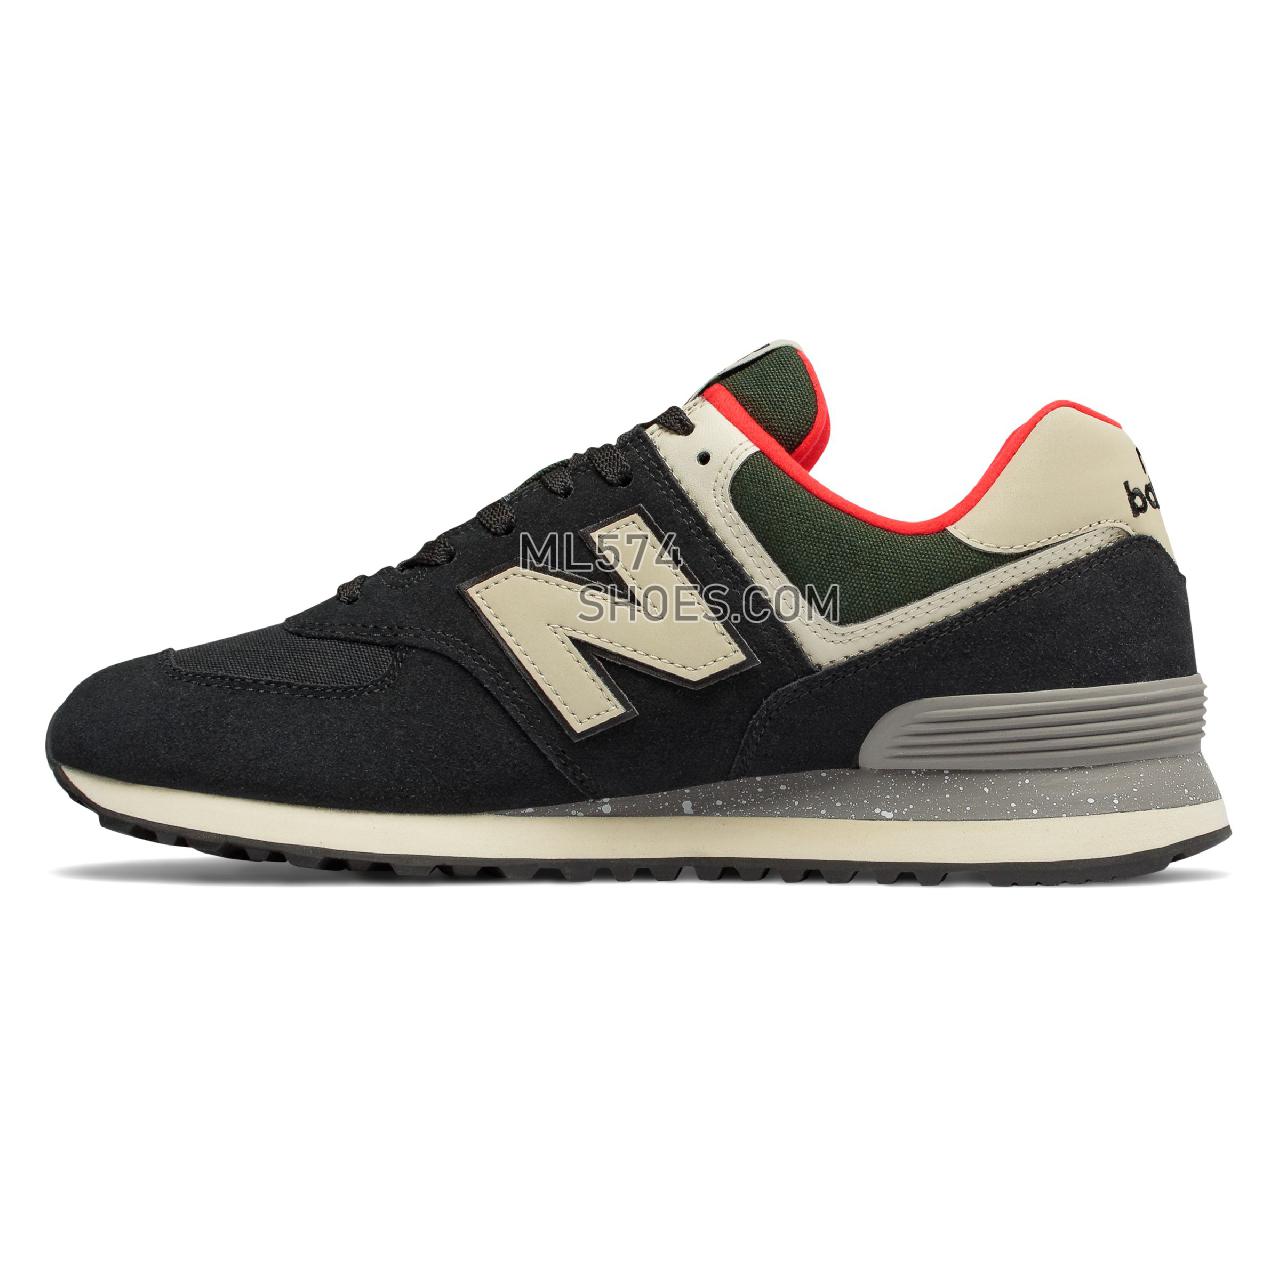 New Balance 574 - Men's 574 - Classic Black with Flame - ML574HVD